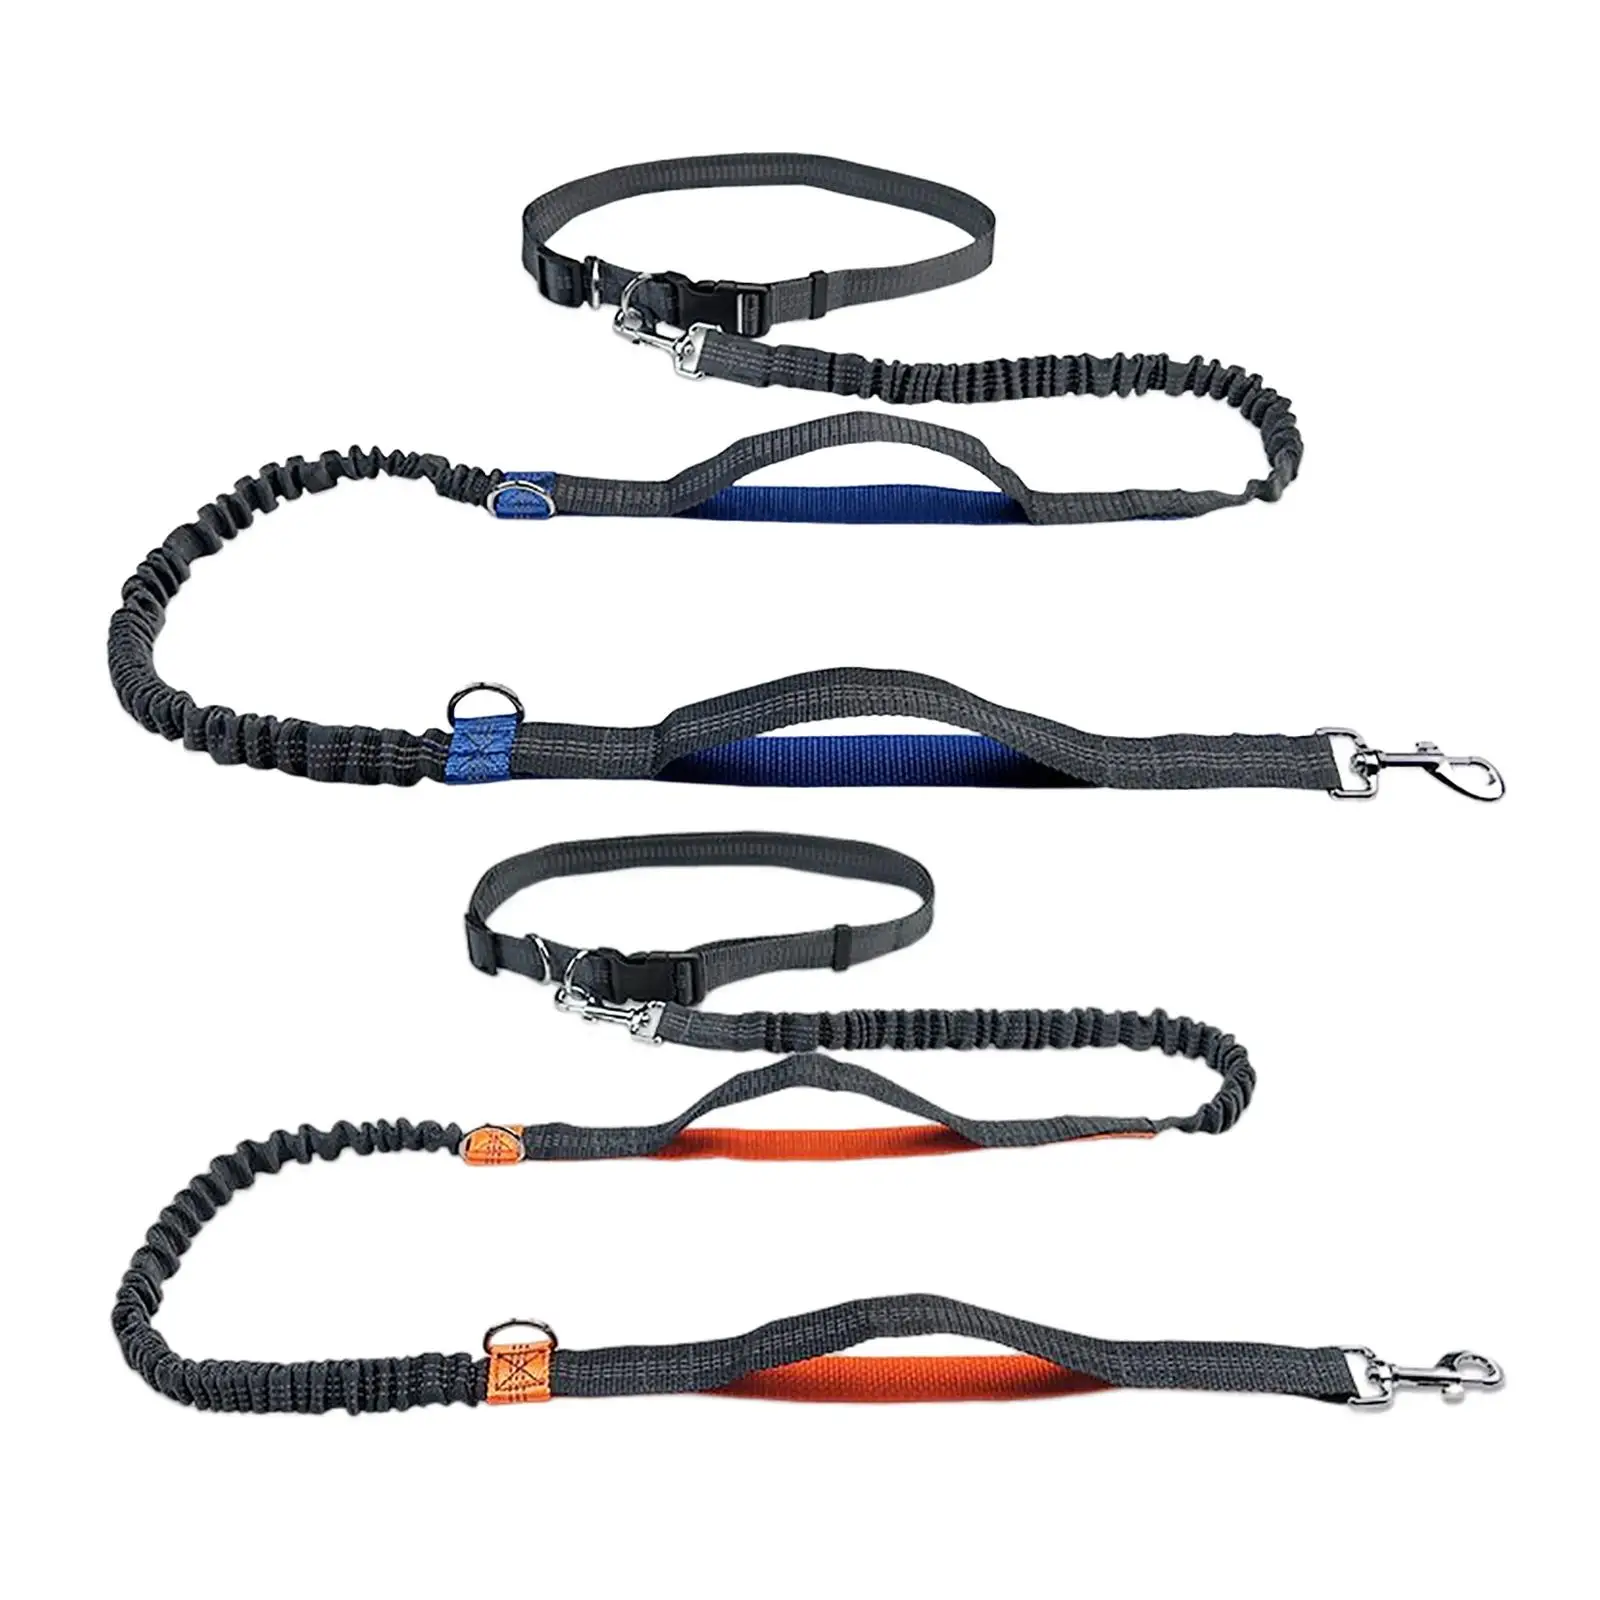 Dogs Leash Running Elasticity Hand Freely Pet Products Dogs Harness Collar Jogging Leash and Adjustable Waist Rope